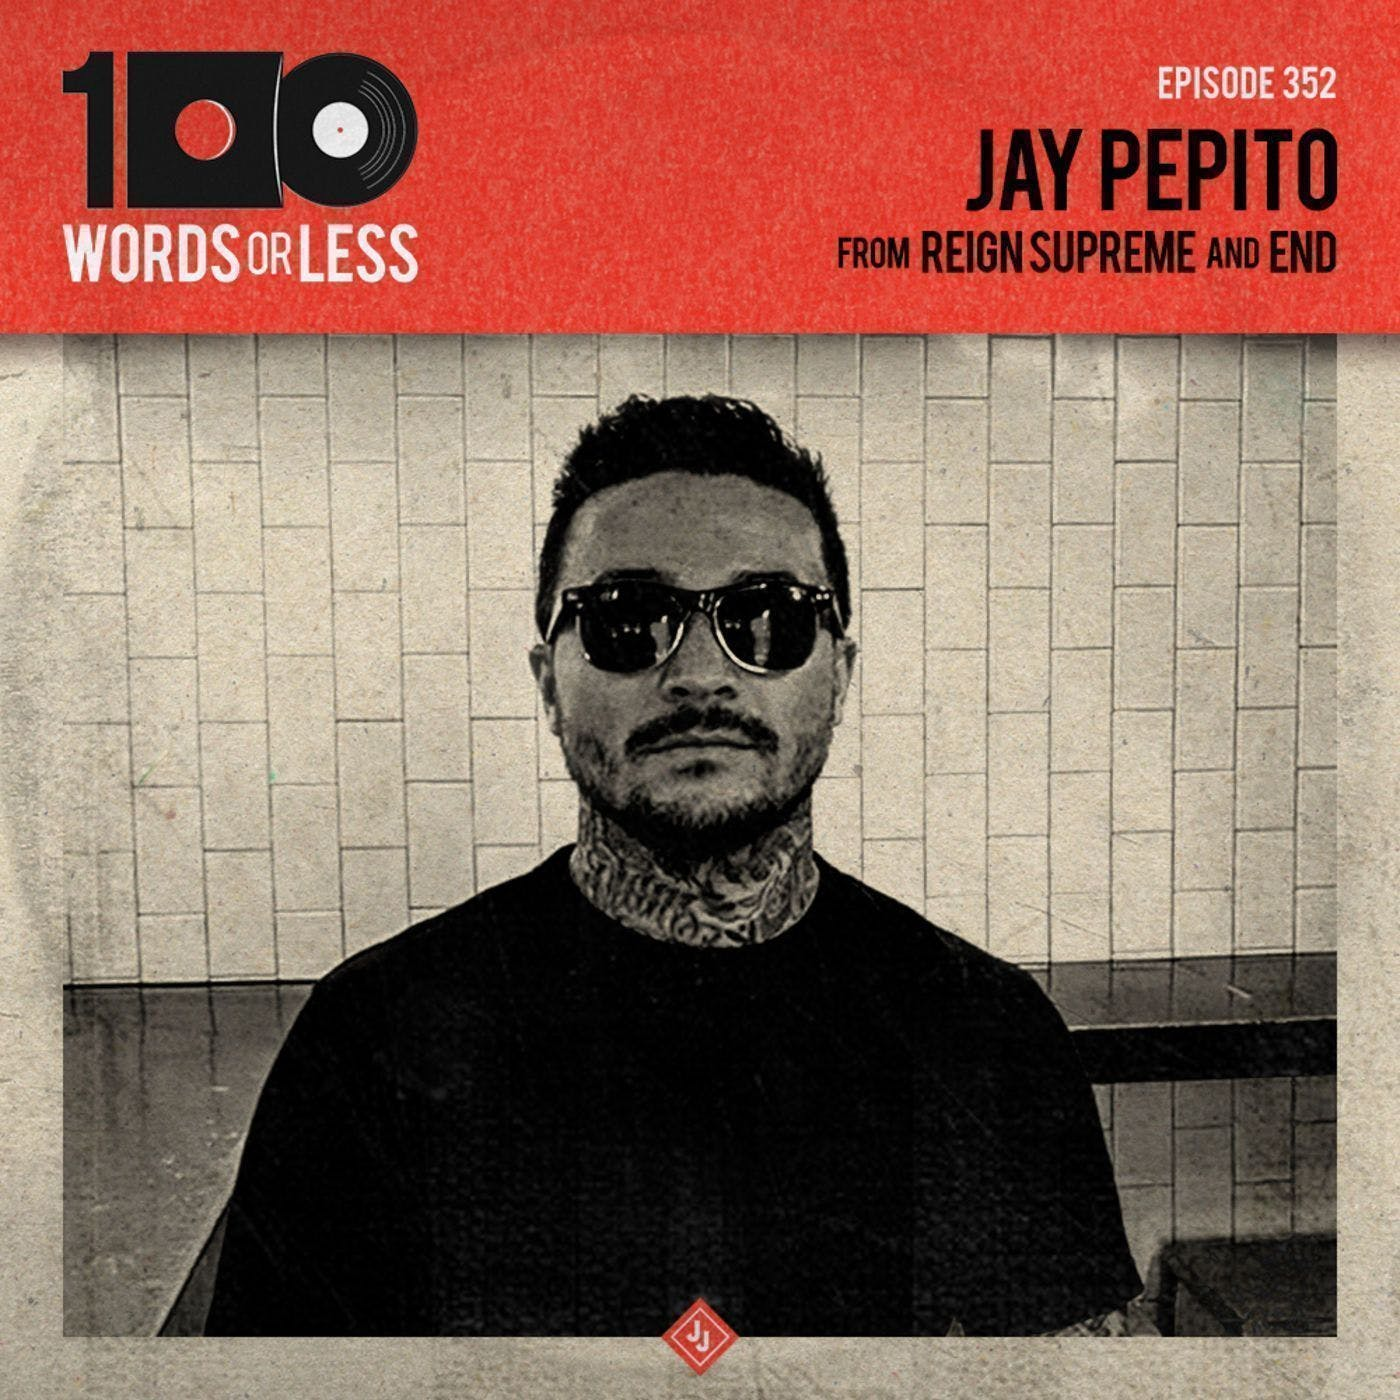 Jay Pepito from Reign Supreme and END